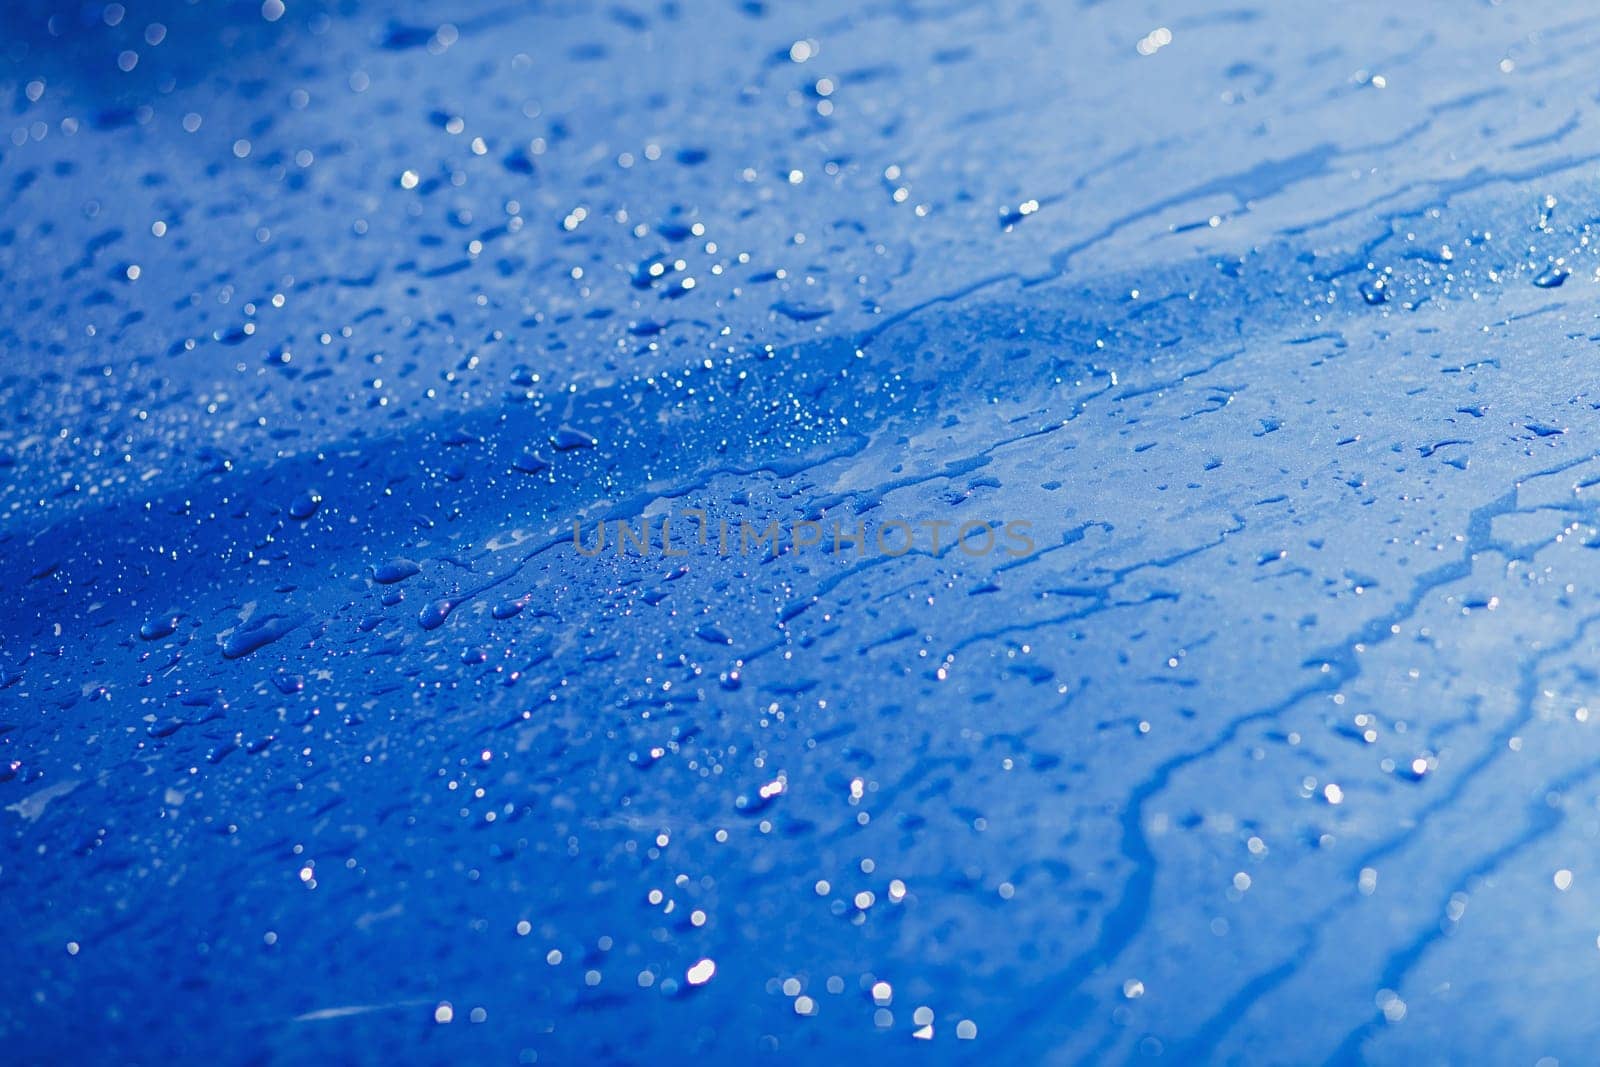 shiny water drops on a blue metallic background